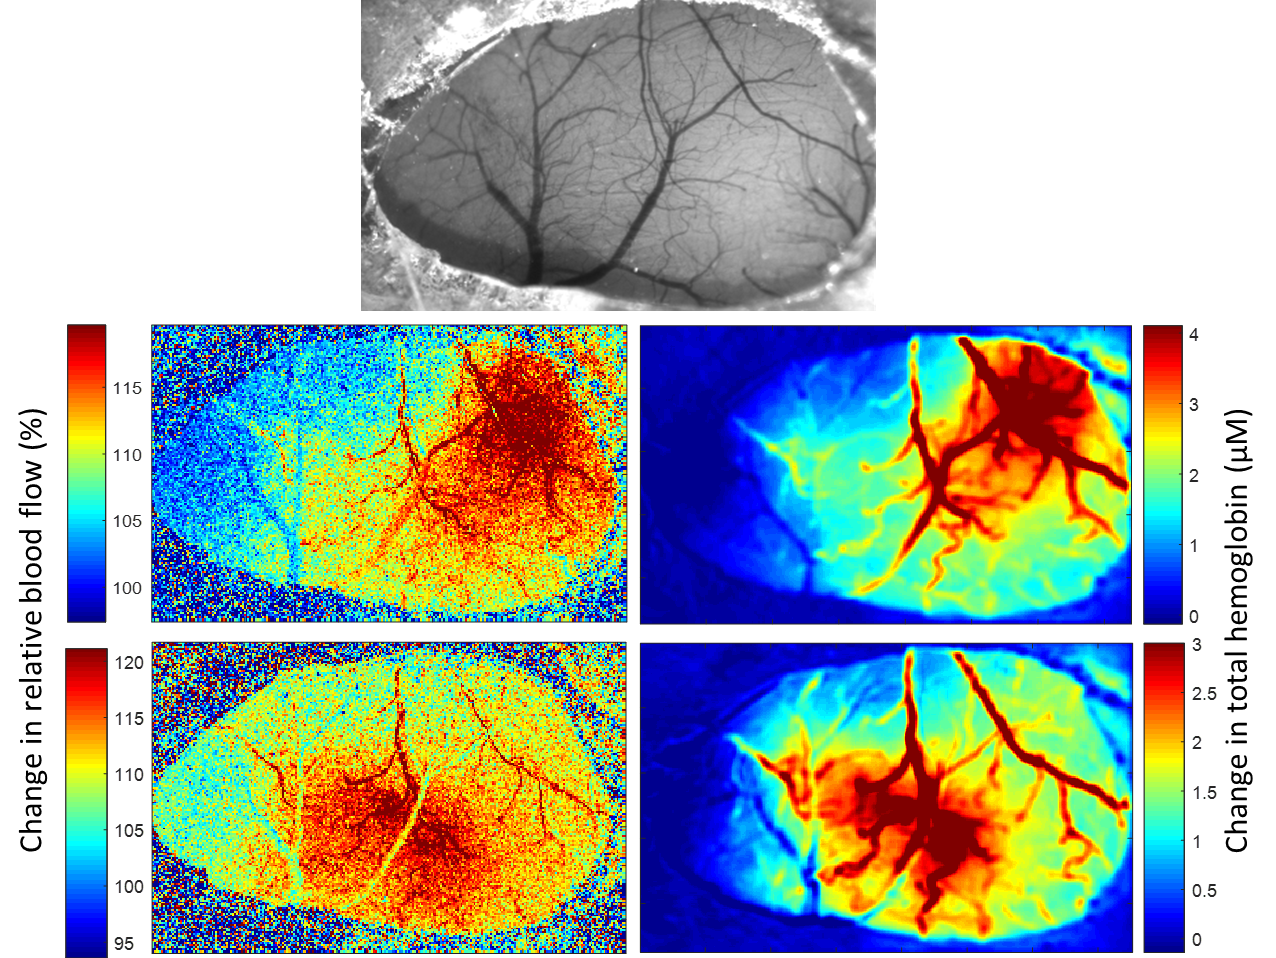 Simultaneous Multispectral and Laser Speckle Imaging | Neurophotonics Center